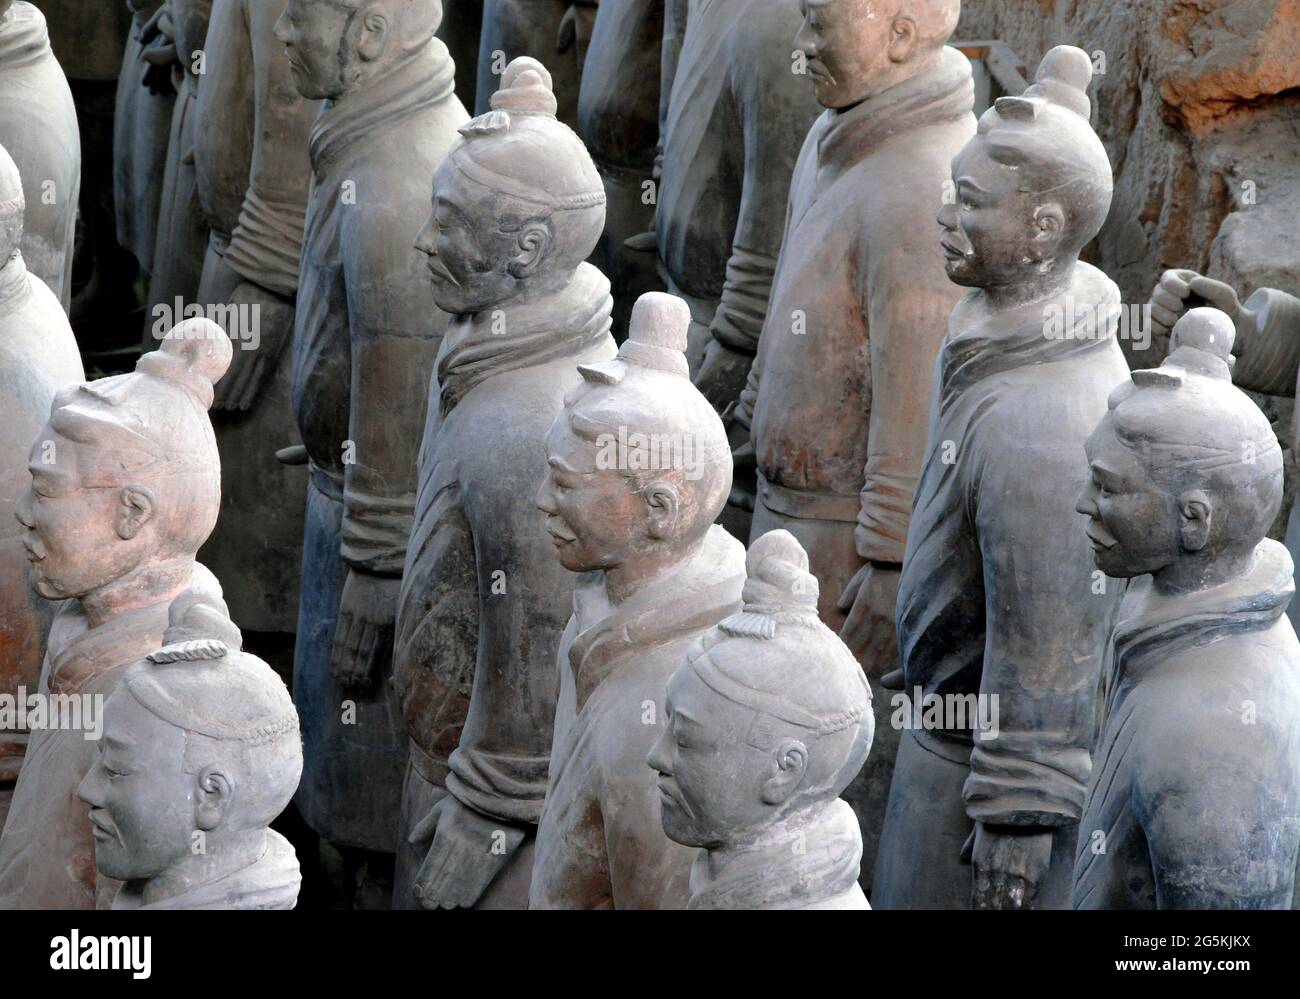 Terracotta Warriors, Xian, Shaanxi Province, China. Detail of soldiers in the Terracotta Army of Emperor Qin Shu Huang, side view. Stock Photo